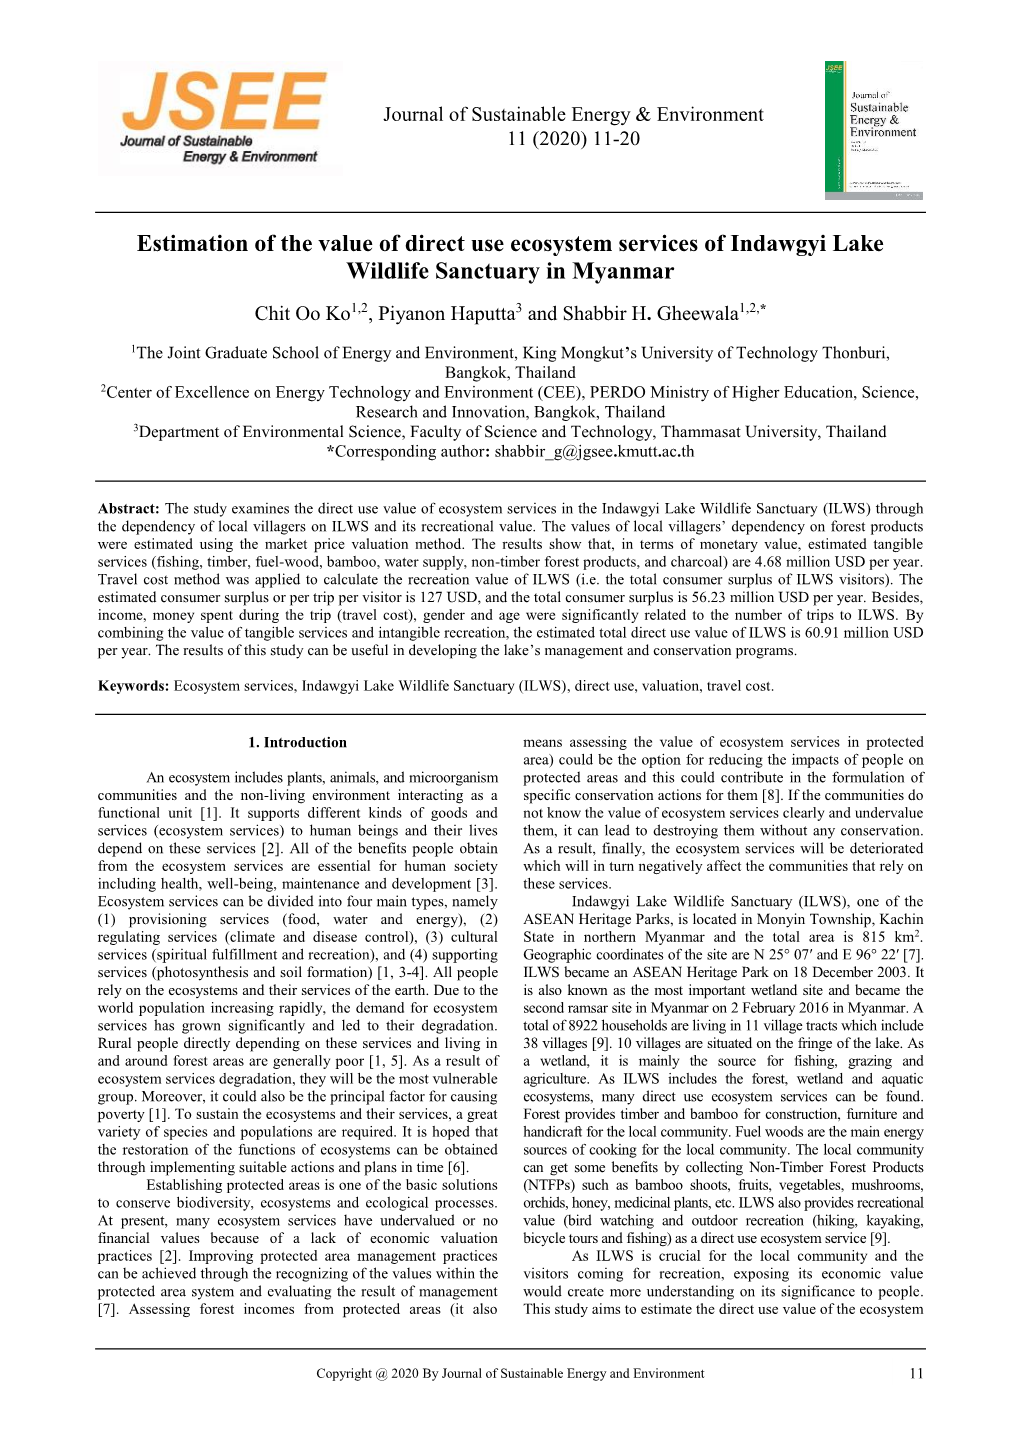 Estimation of the Value of Direct Use Ecosystem Services of Indawgyi Lake Wildlife Sanctuary in Myanmar Chit Oo Ko1,2, Piyanon Haputta3 and Shabbir H